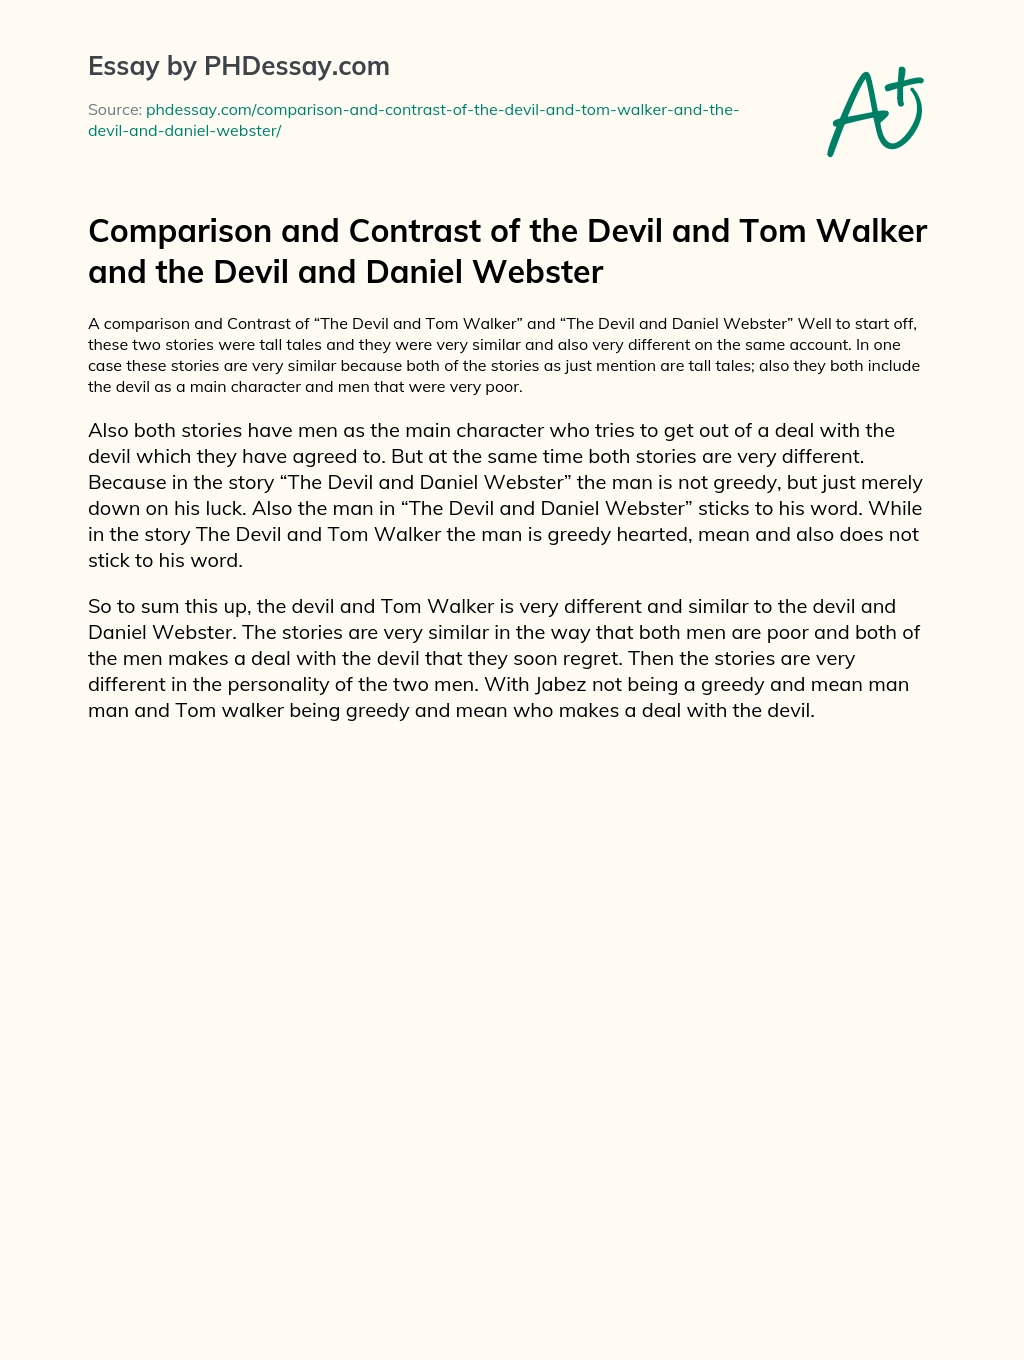 Comparison and Contrast of the Devil and Tom Walker and the Devil and Daniel Webster essay